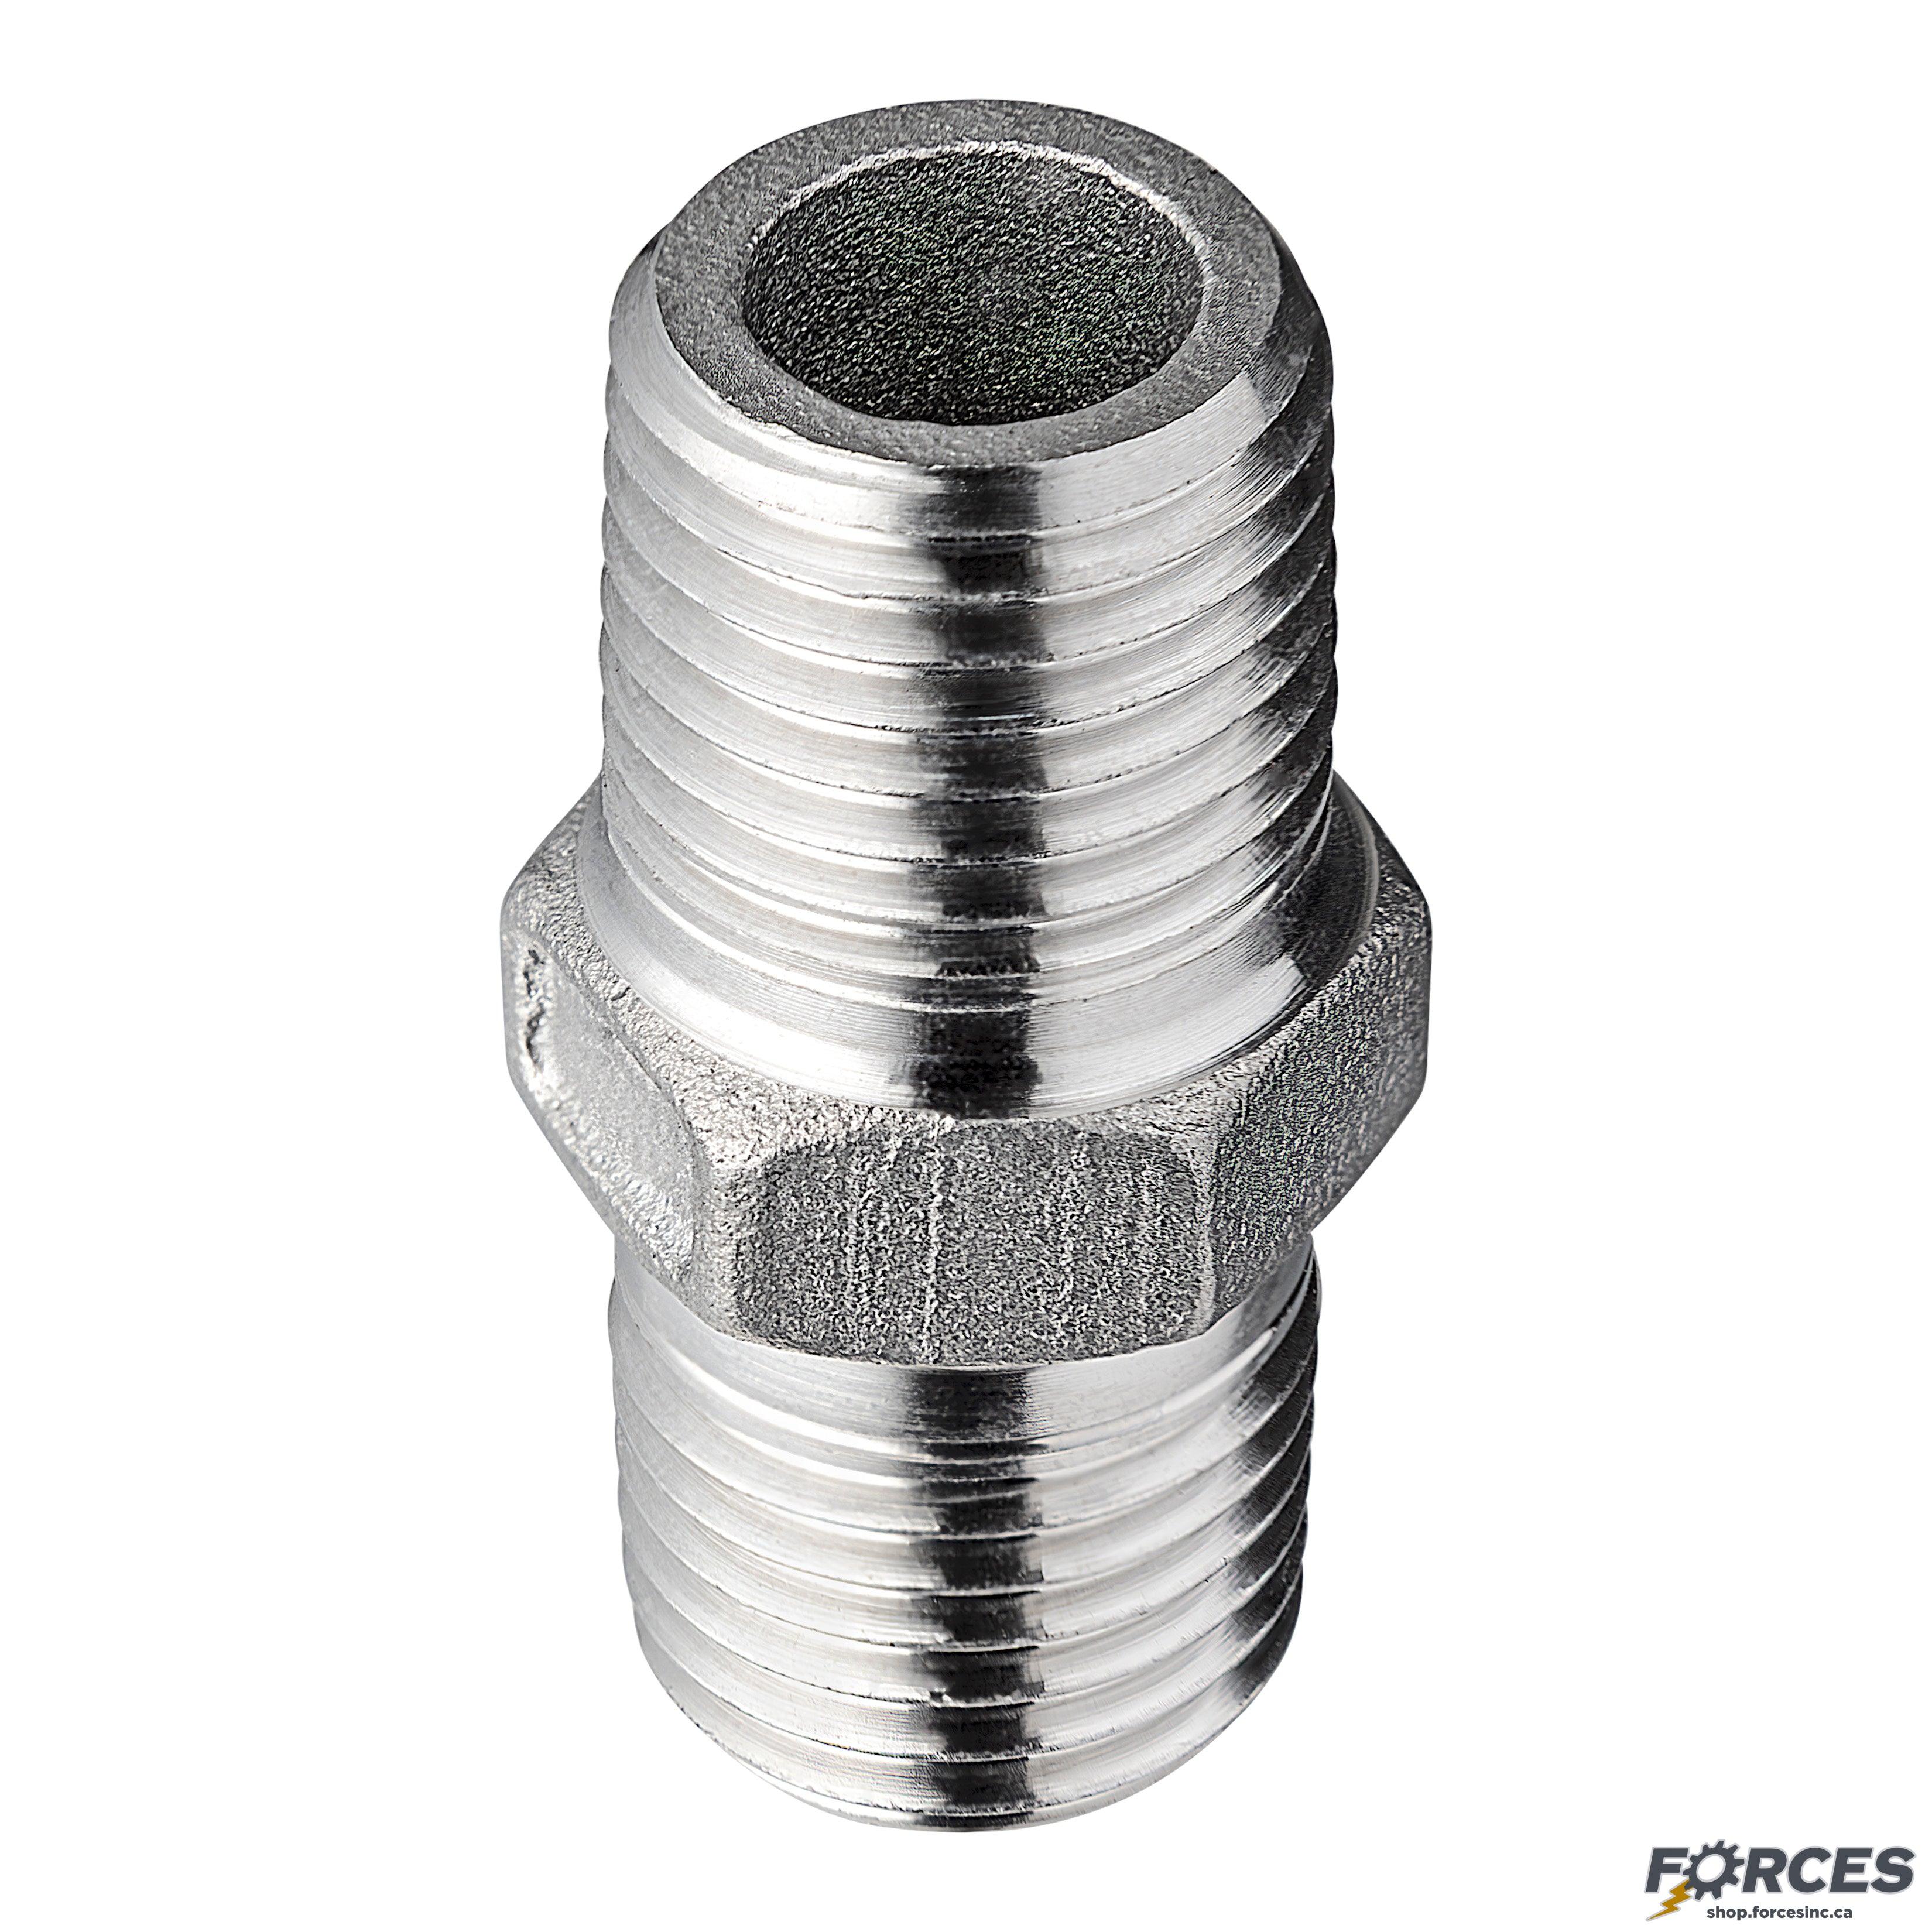 1/4" x 1/8" Hex Nipple NPT #150 - Stainless Steel 316 - Forces Inc